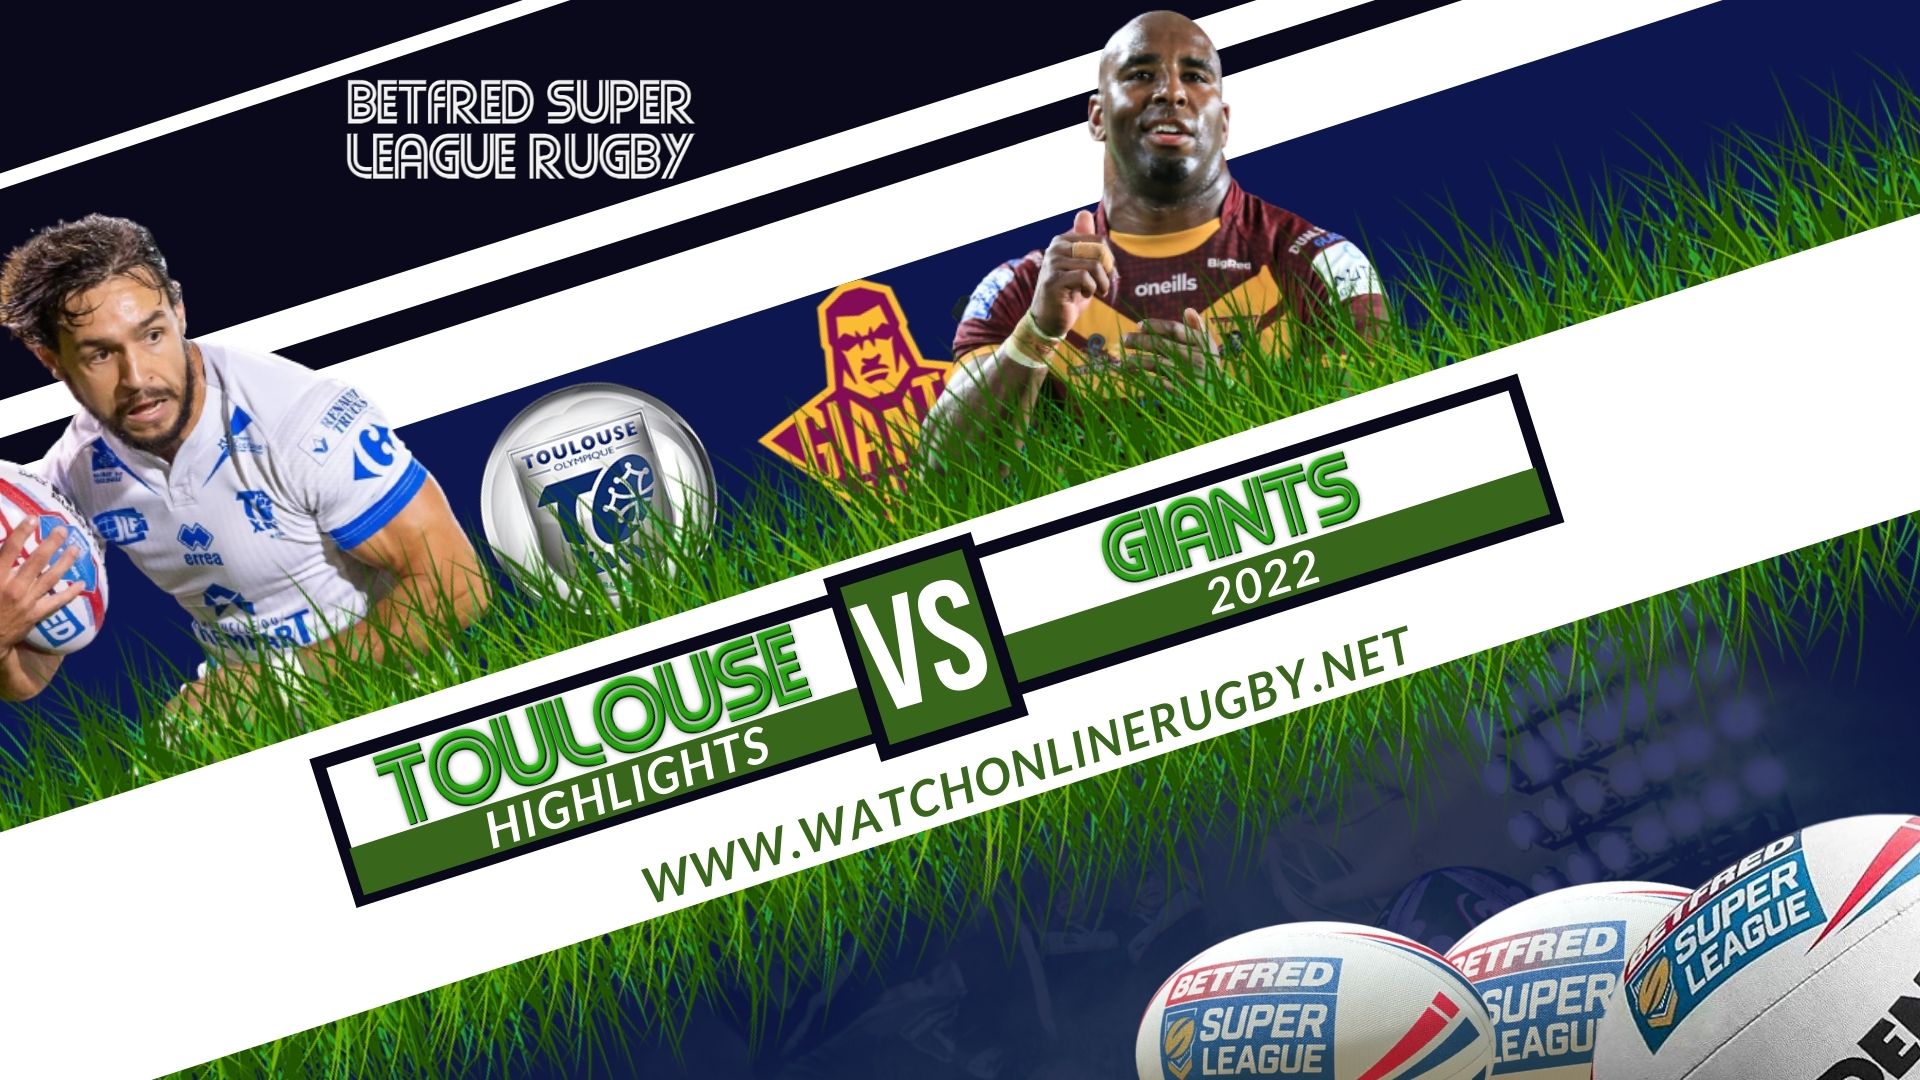 Toulouse Vs Huddersfield Giants Super League Rugby 2022 RD 1